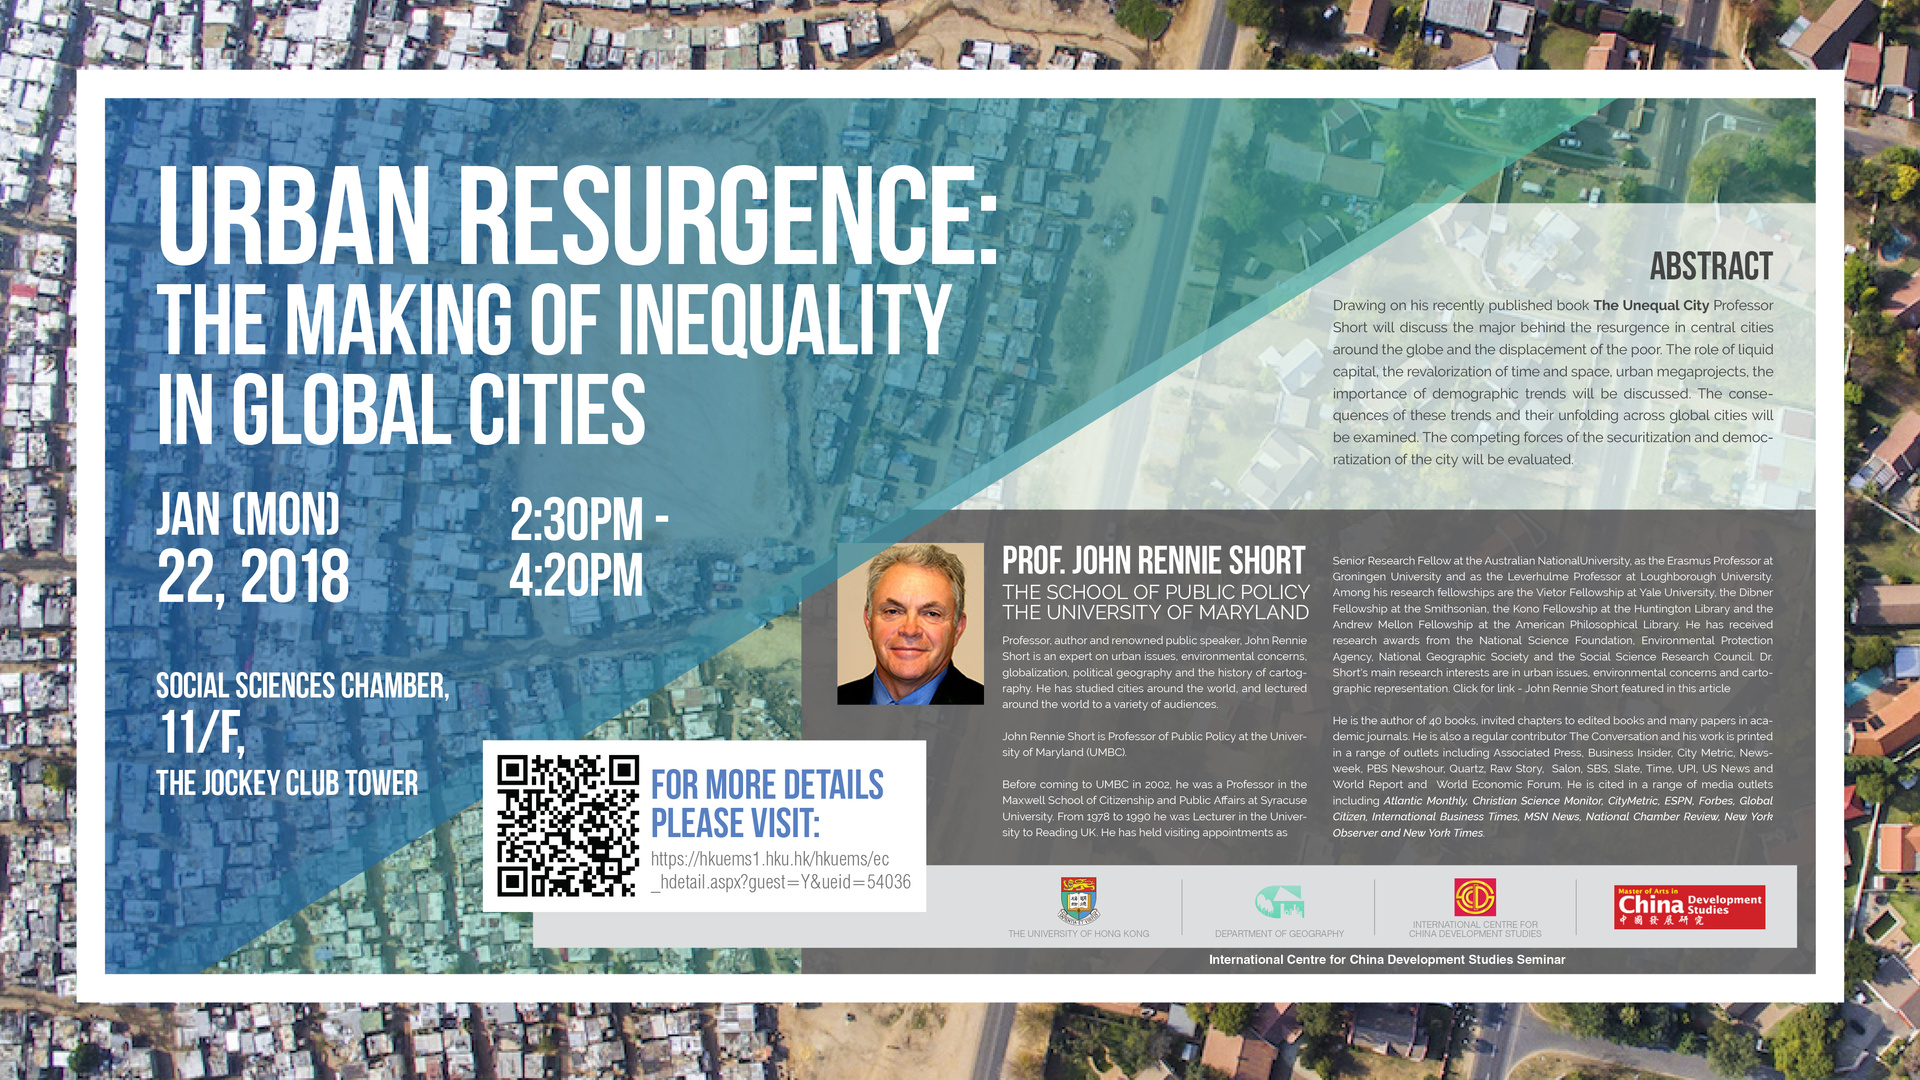 Public lecture and Elite Seminar on “Urban Resurgence: the Making of Inequality in Global Cities” 